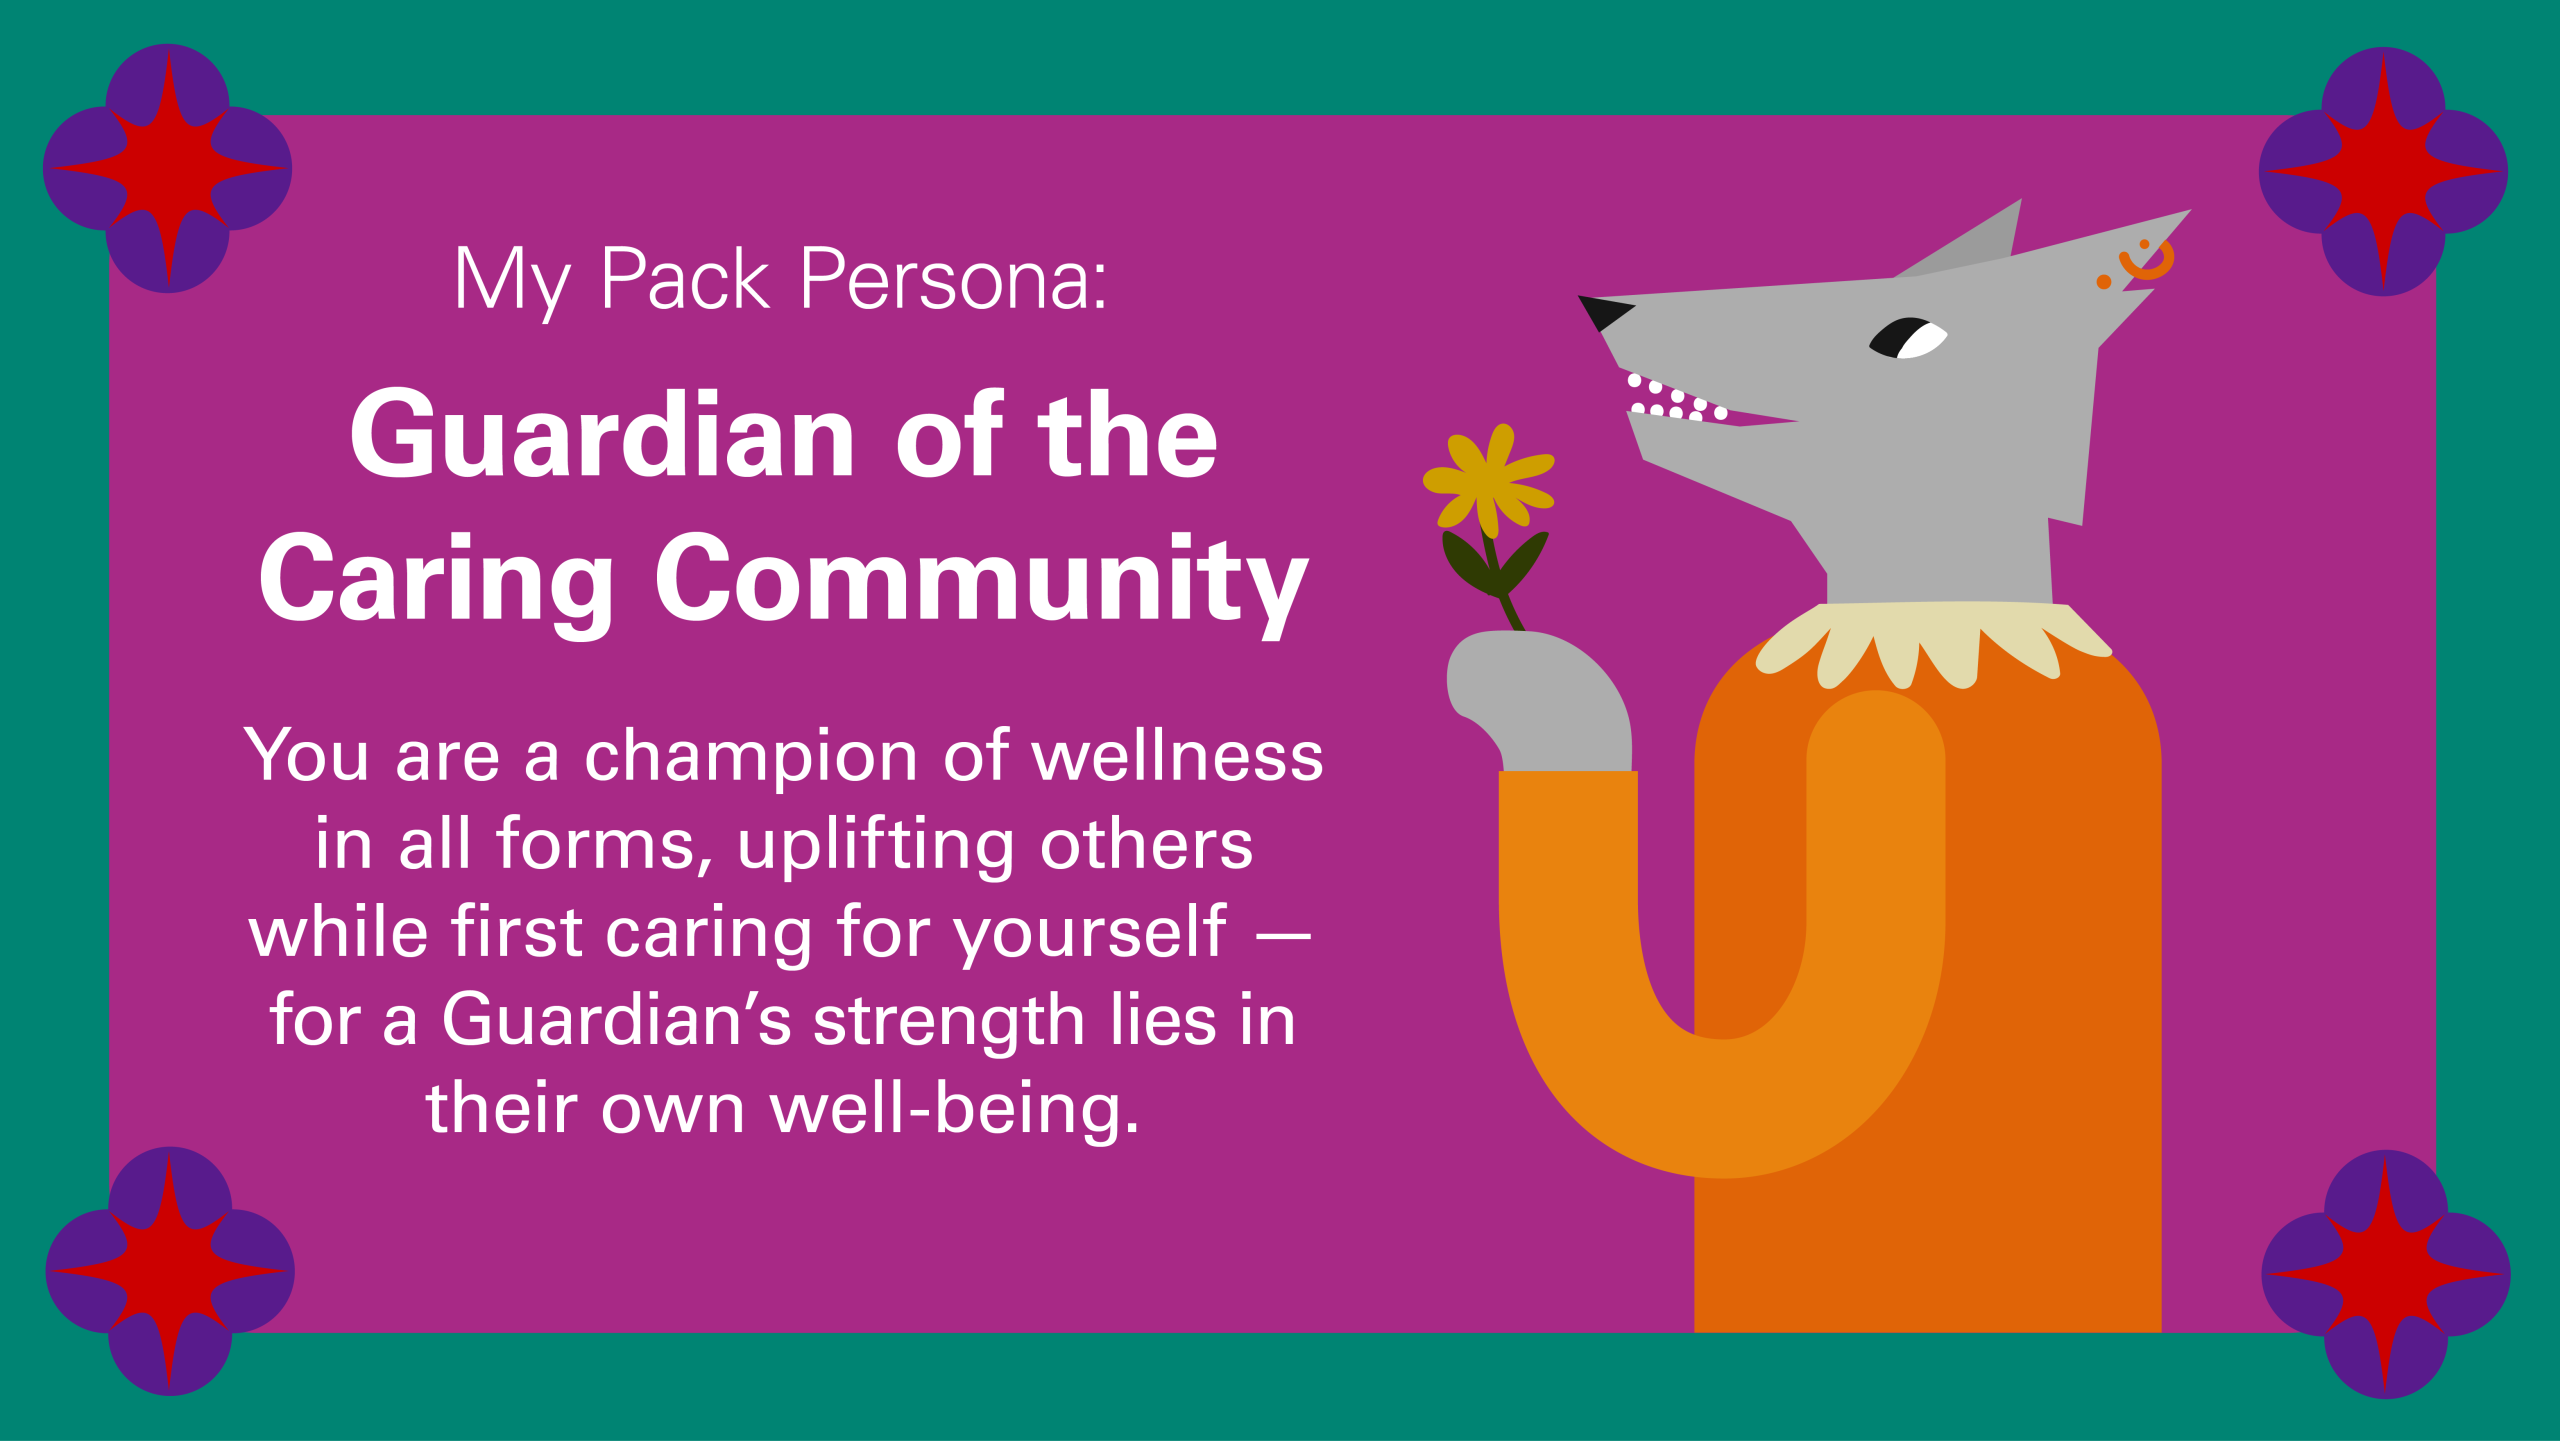 My Pack Persona: Guardian of the Caring Community You are a champion of wellness in all forms, uplifting others while first caring for yourself — for a Guardian’s strength lies in their own well-being.